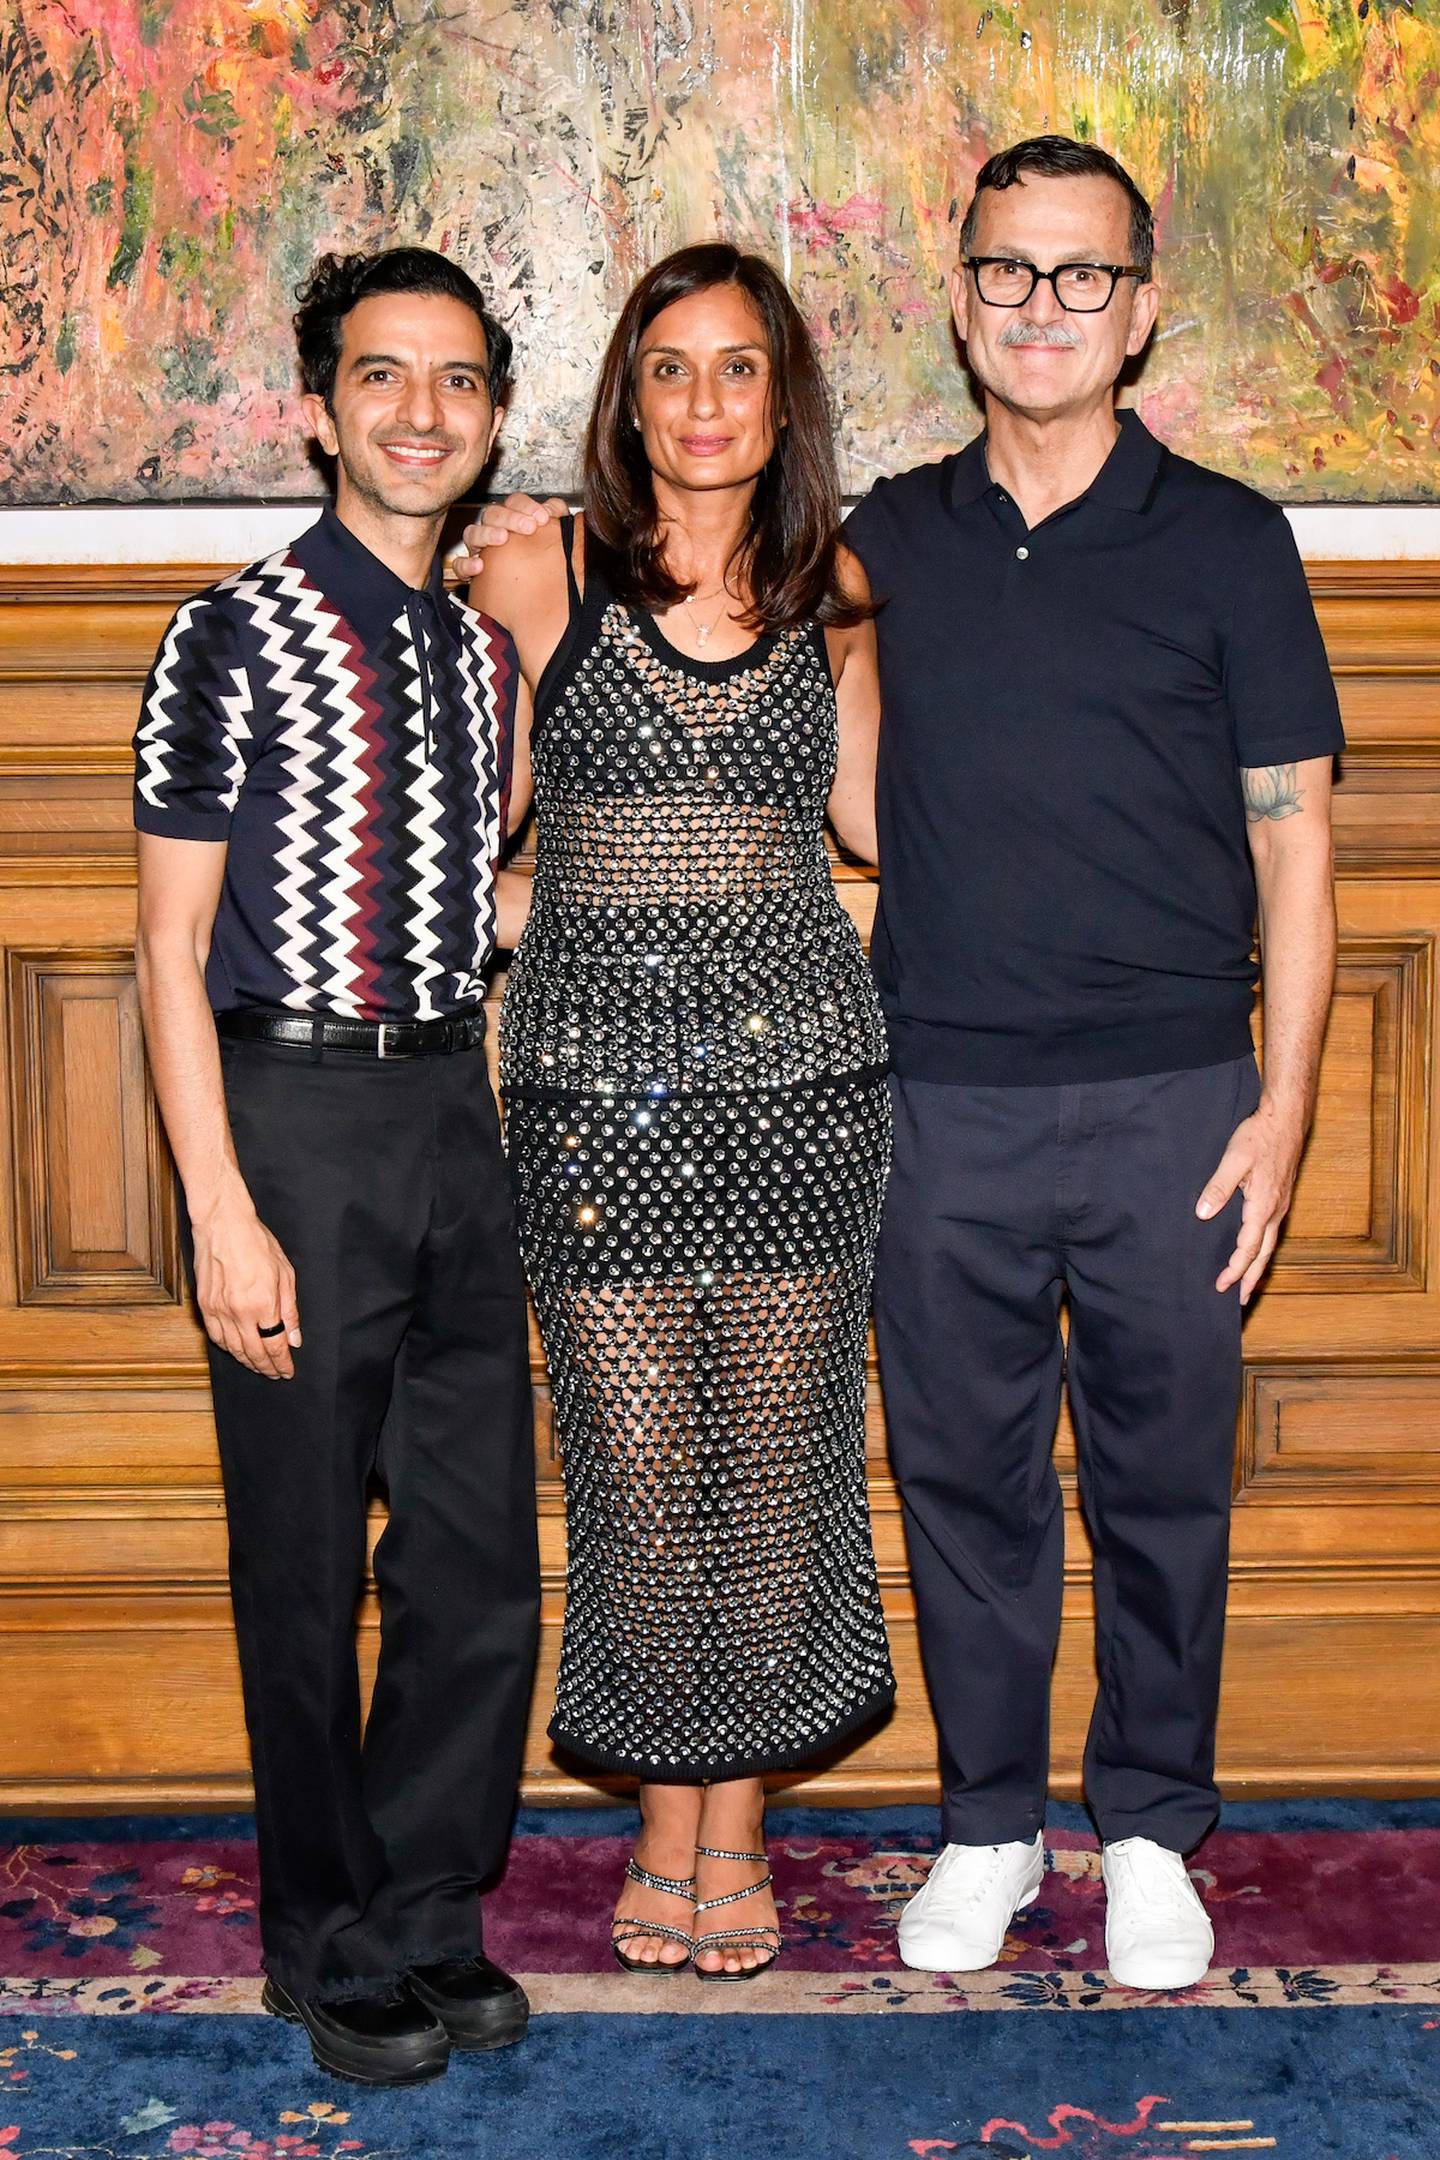 BoF's Imran Amed, consultant Roopal Patel and the CFDA's Steven Kolb at the BoF x Shop With Google dinner celebrating New York Fashion Week SS24.